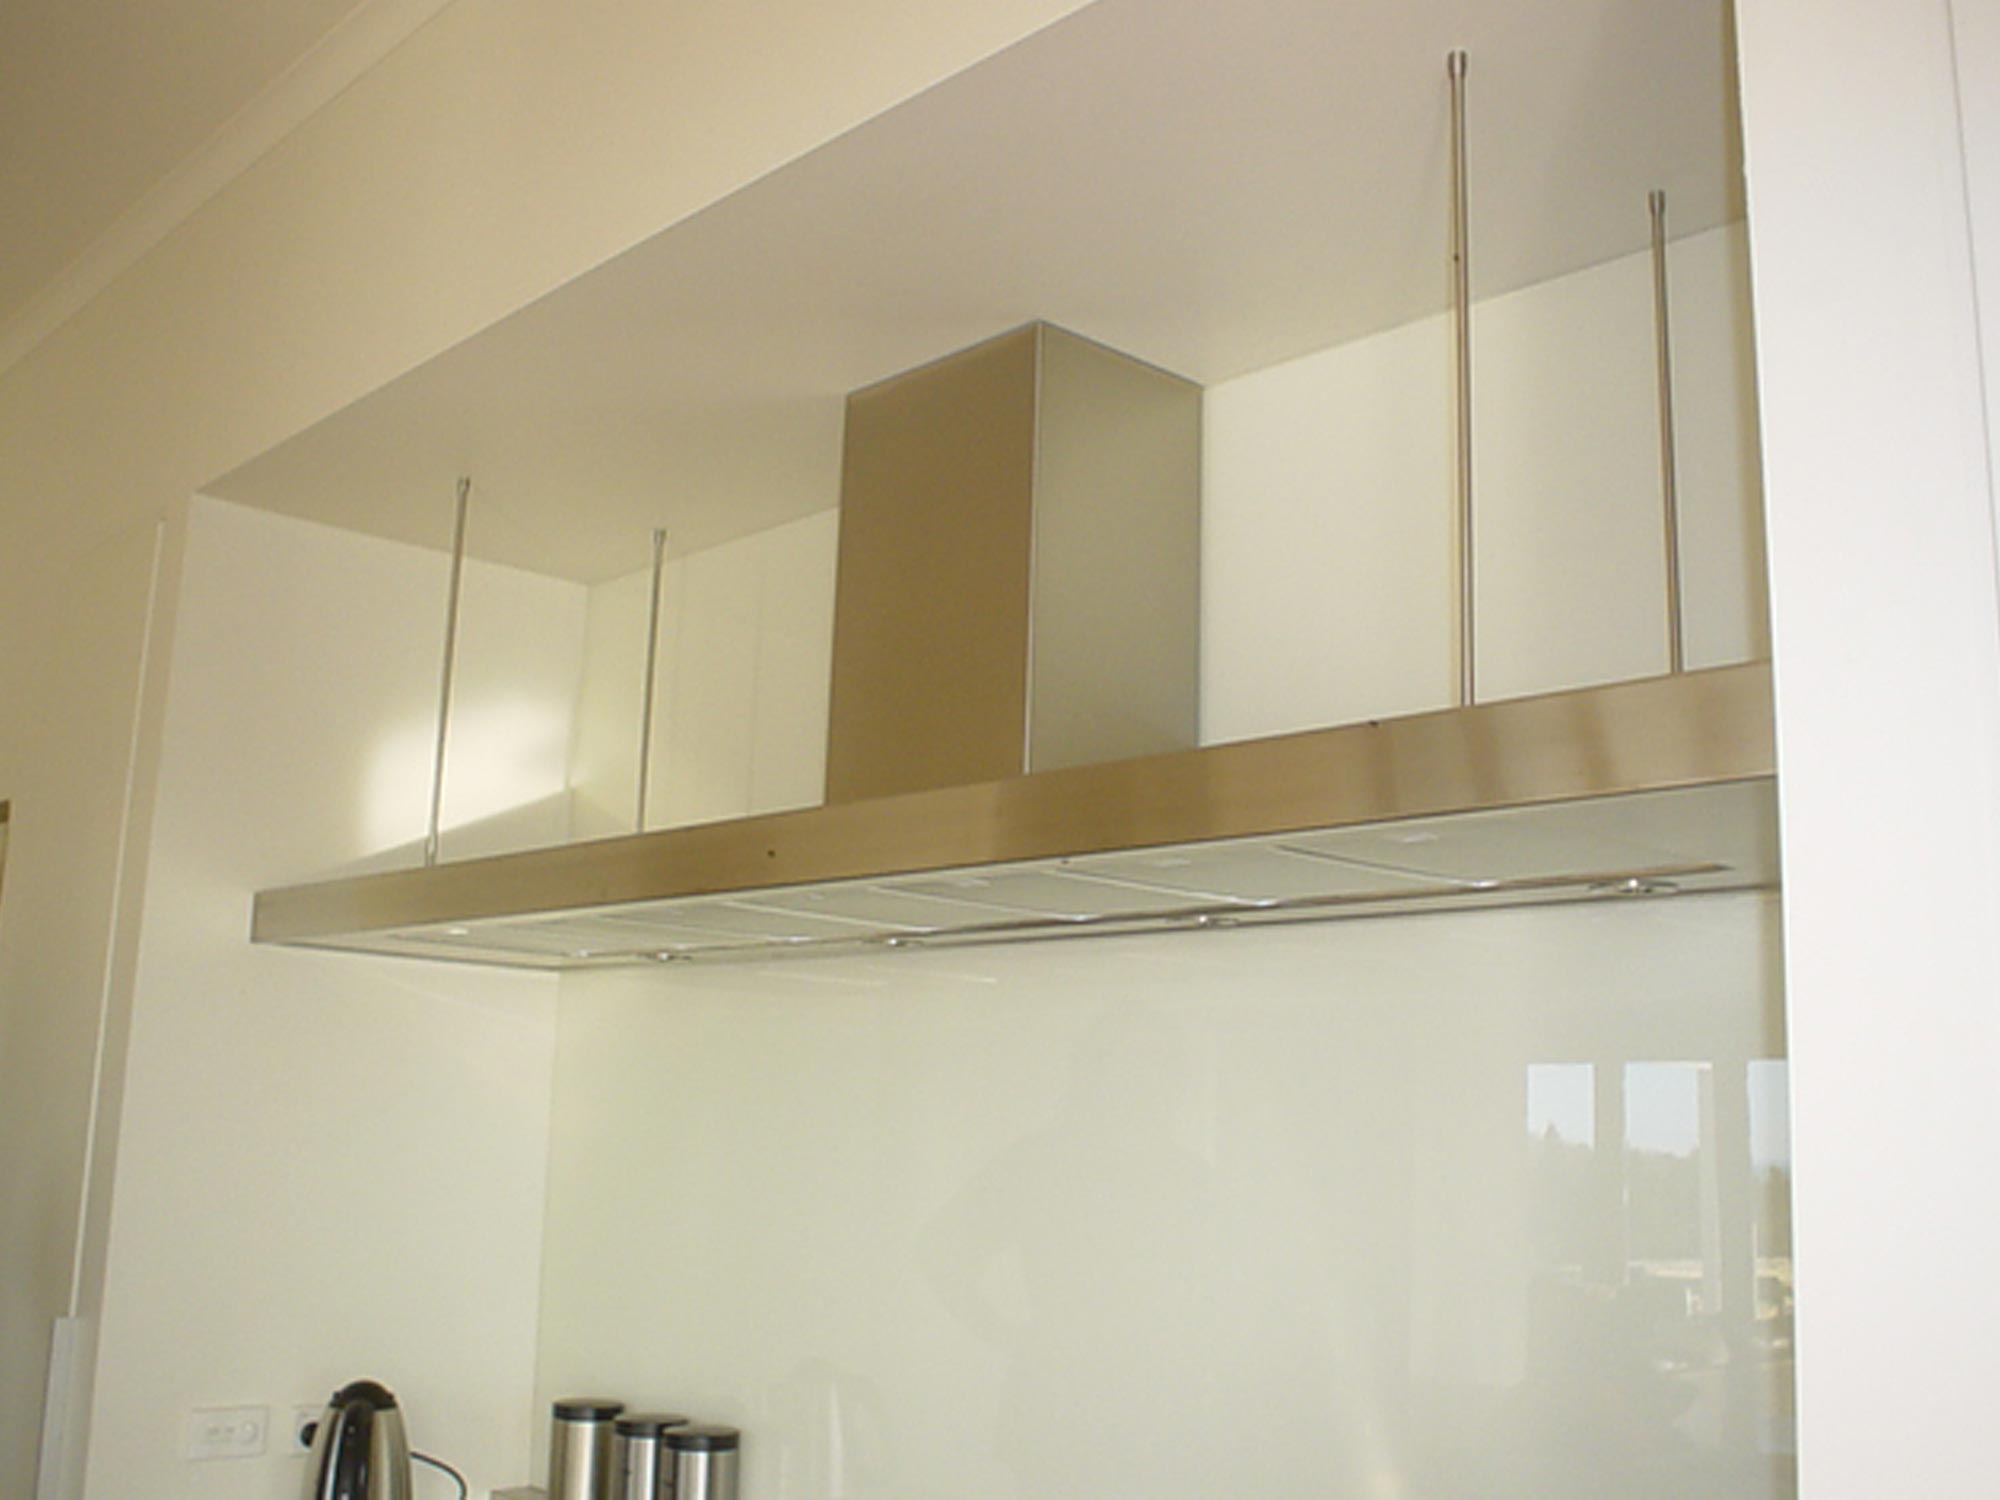 architectural range hoods domestic long stainless